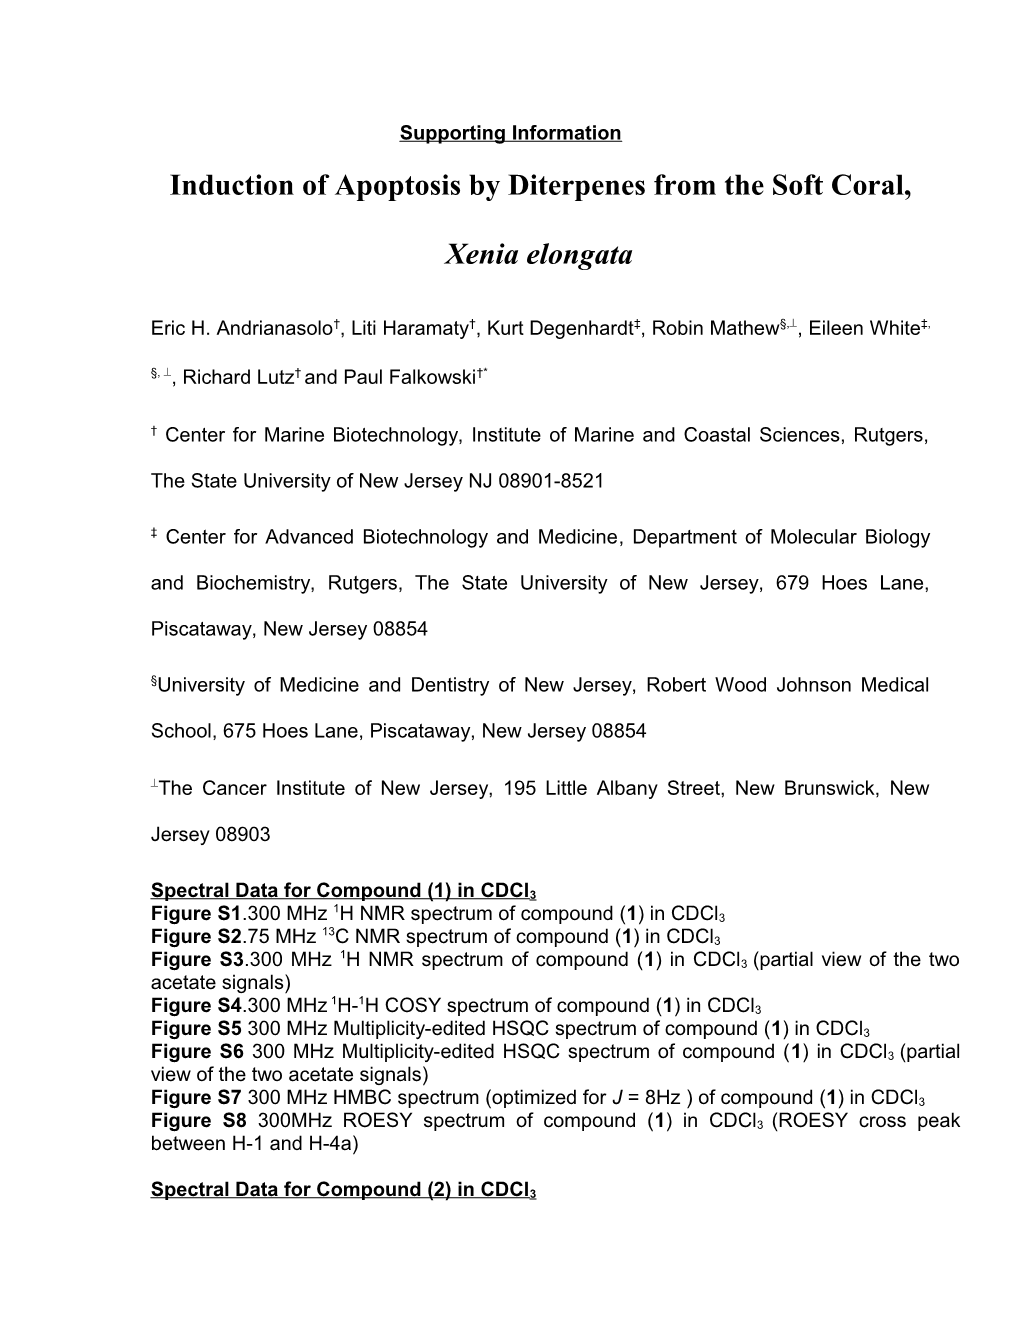 Induction of Apoptosis by Diterpenes from the Soft Coral, Xenia Elongata